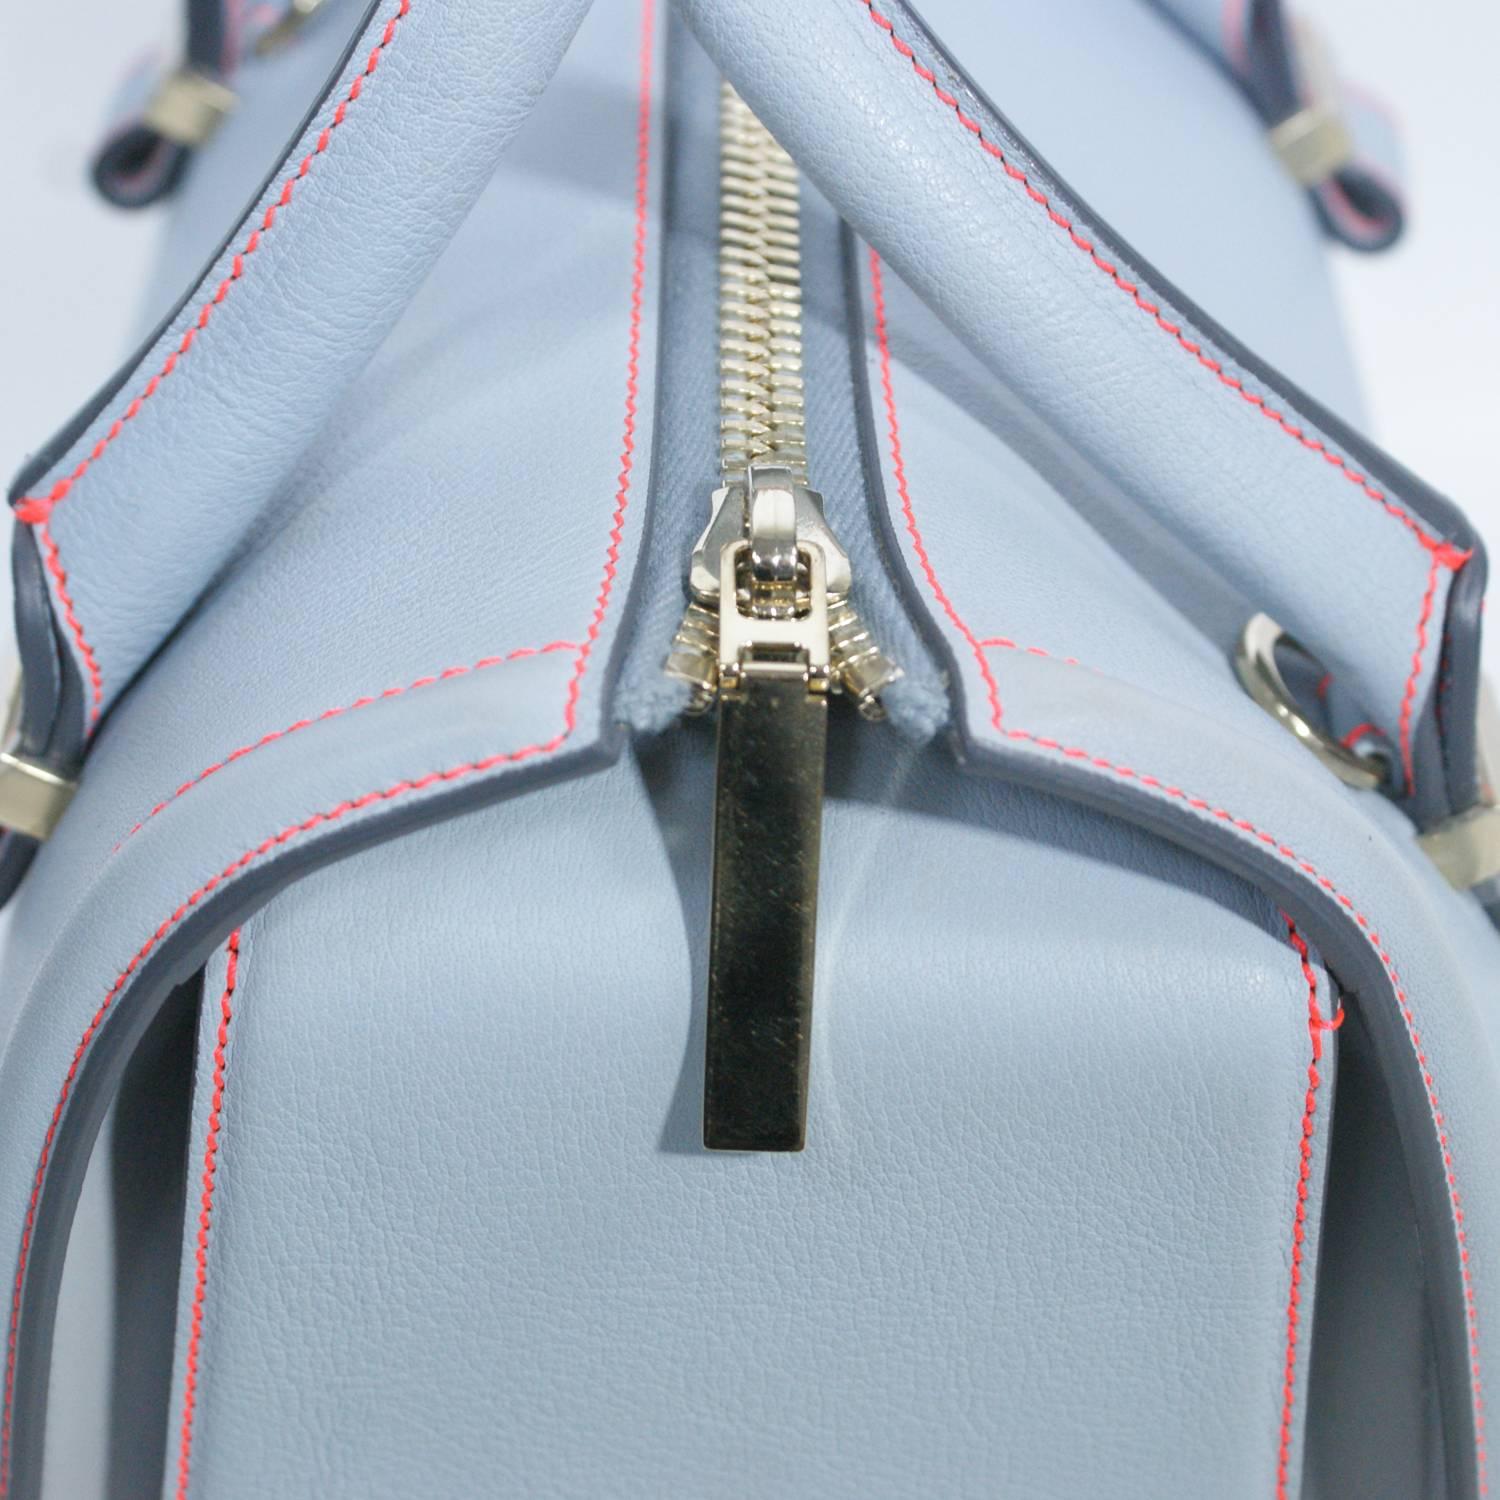 Light blue leather
Pink stitching
Silver tone hardware
Two Handles
Top zip closure 
Originally $1100.00